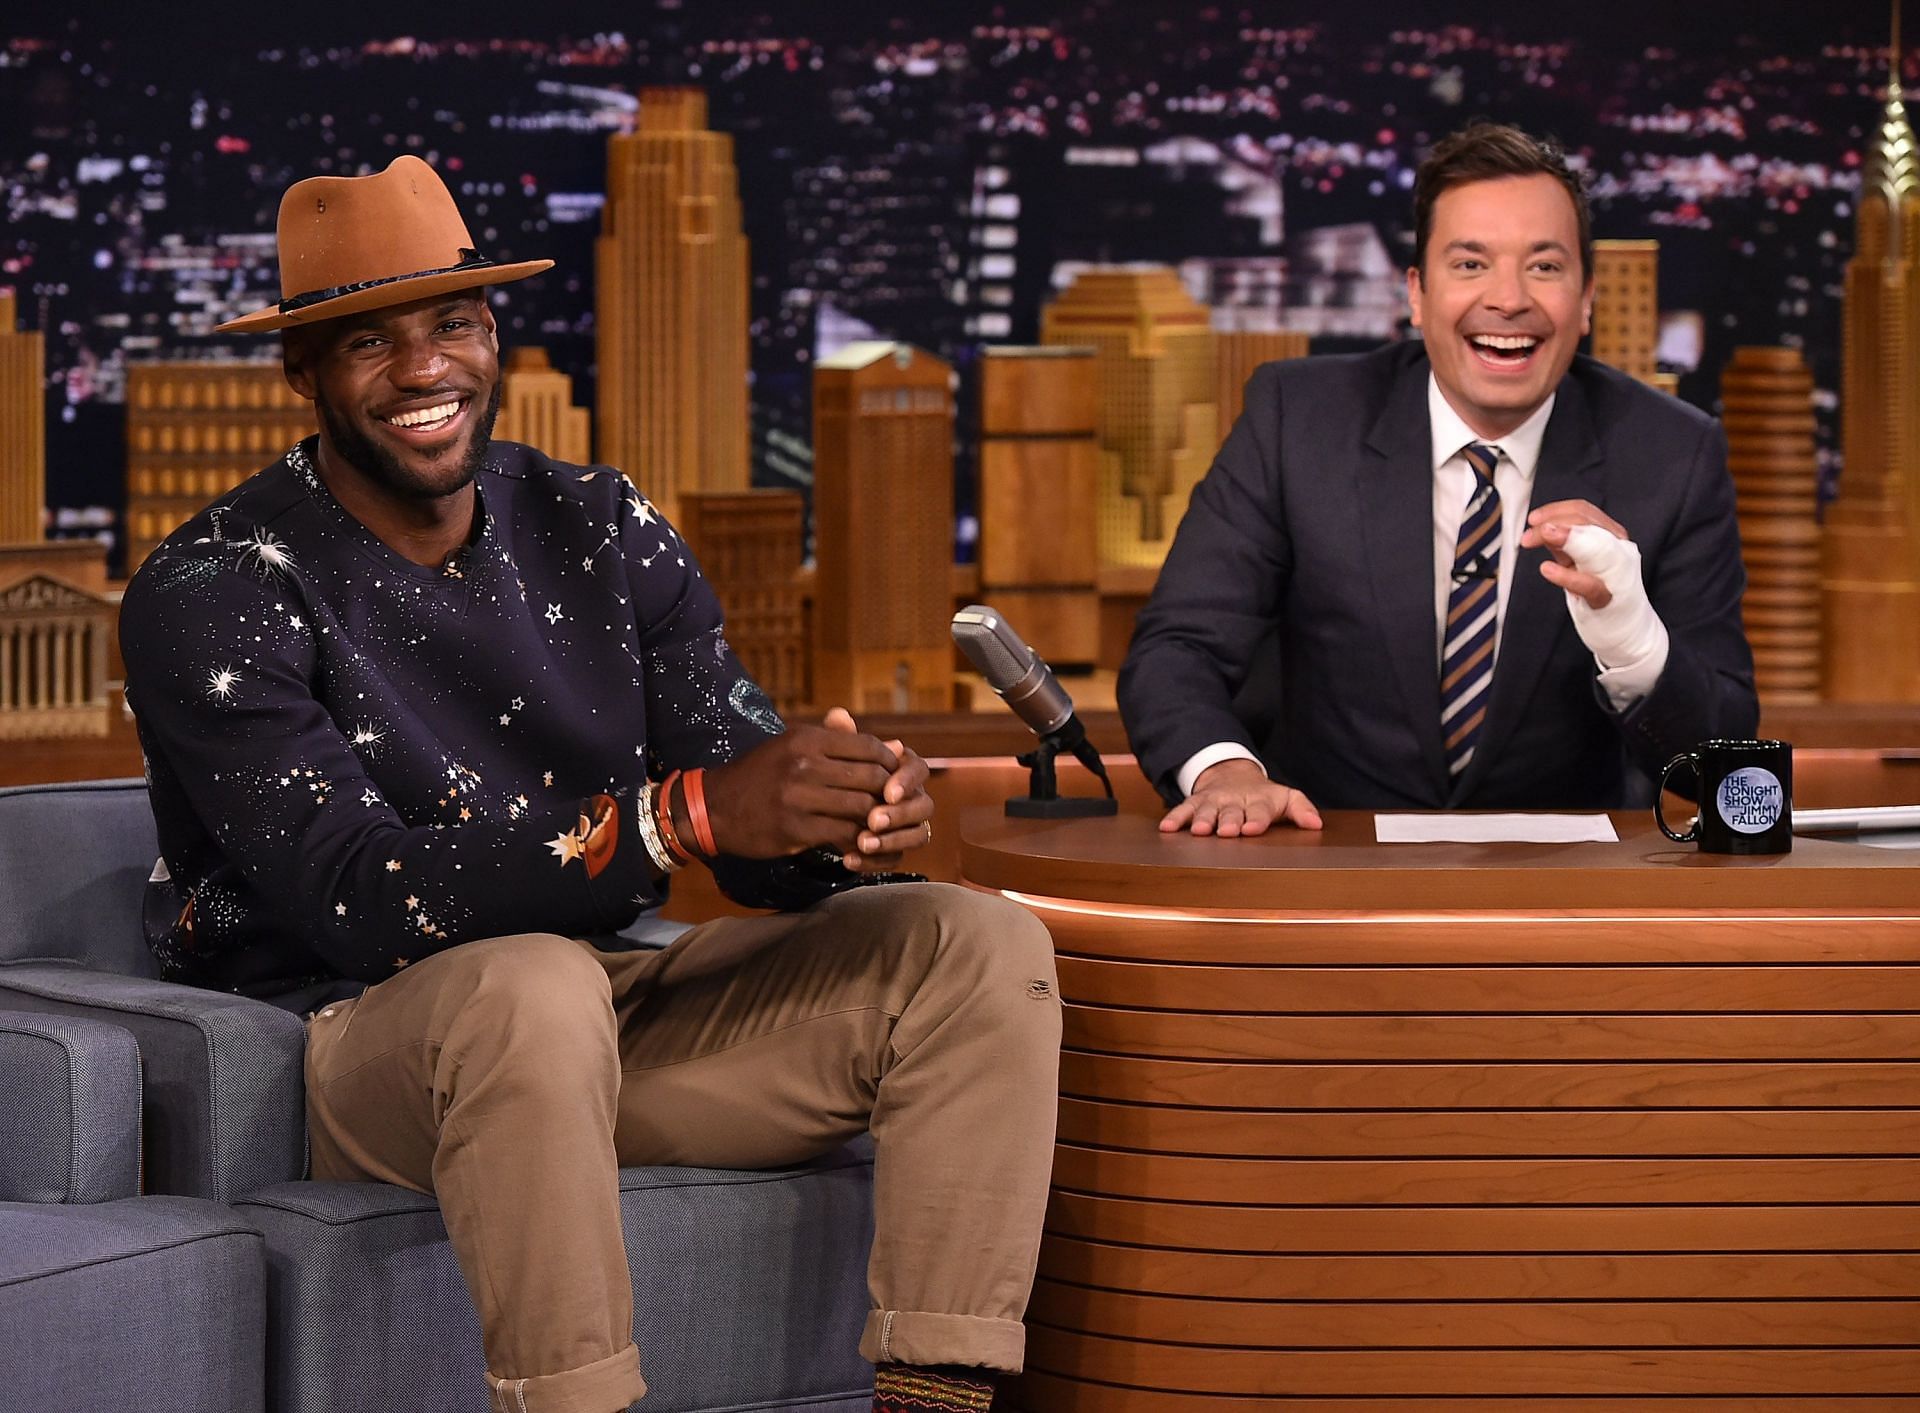 LeBron James on &quot;The Tonight Show Starring Jimmy Fallon&quot;